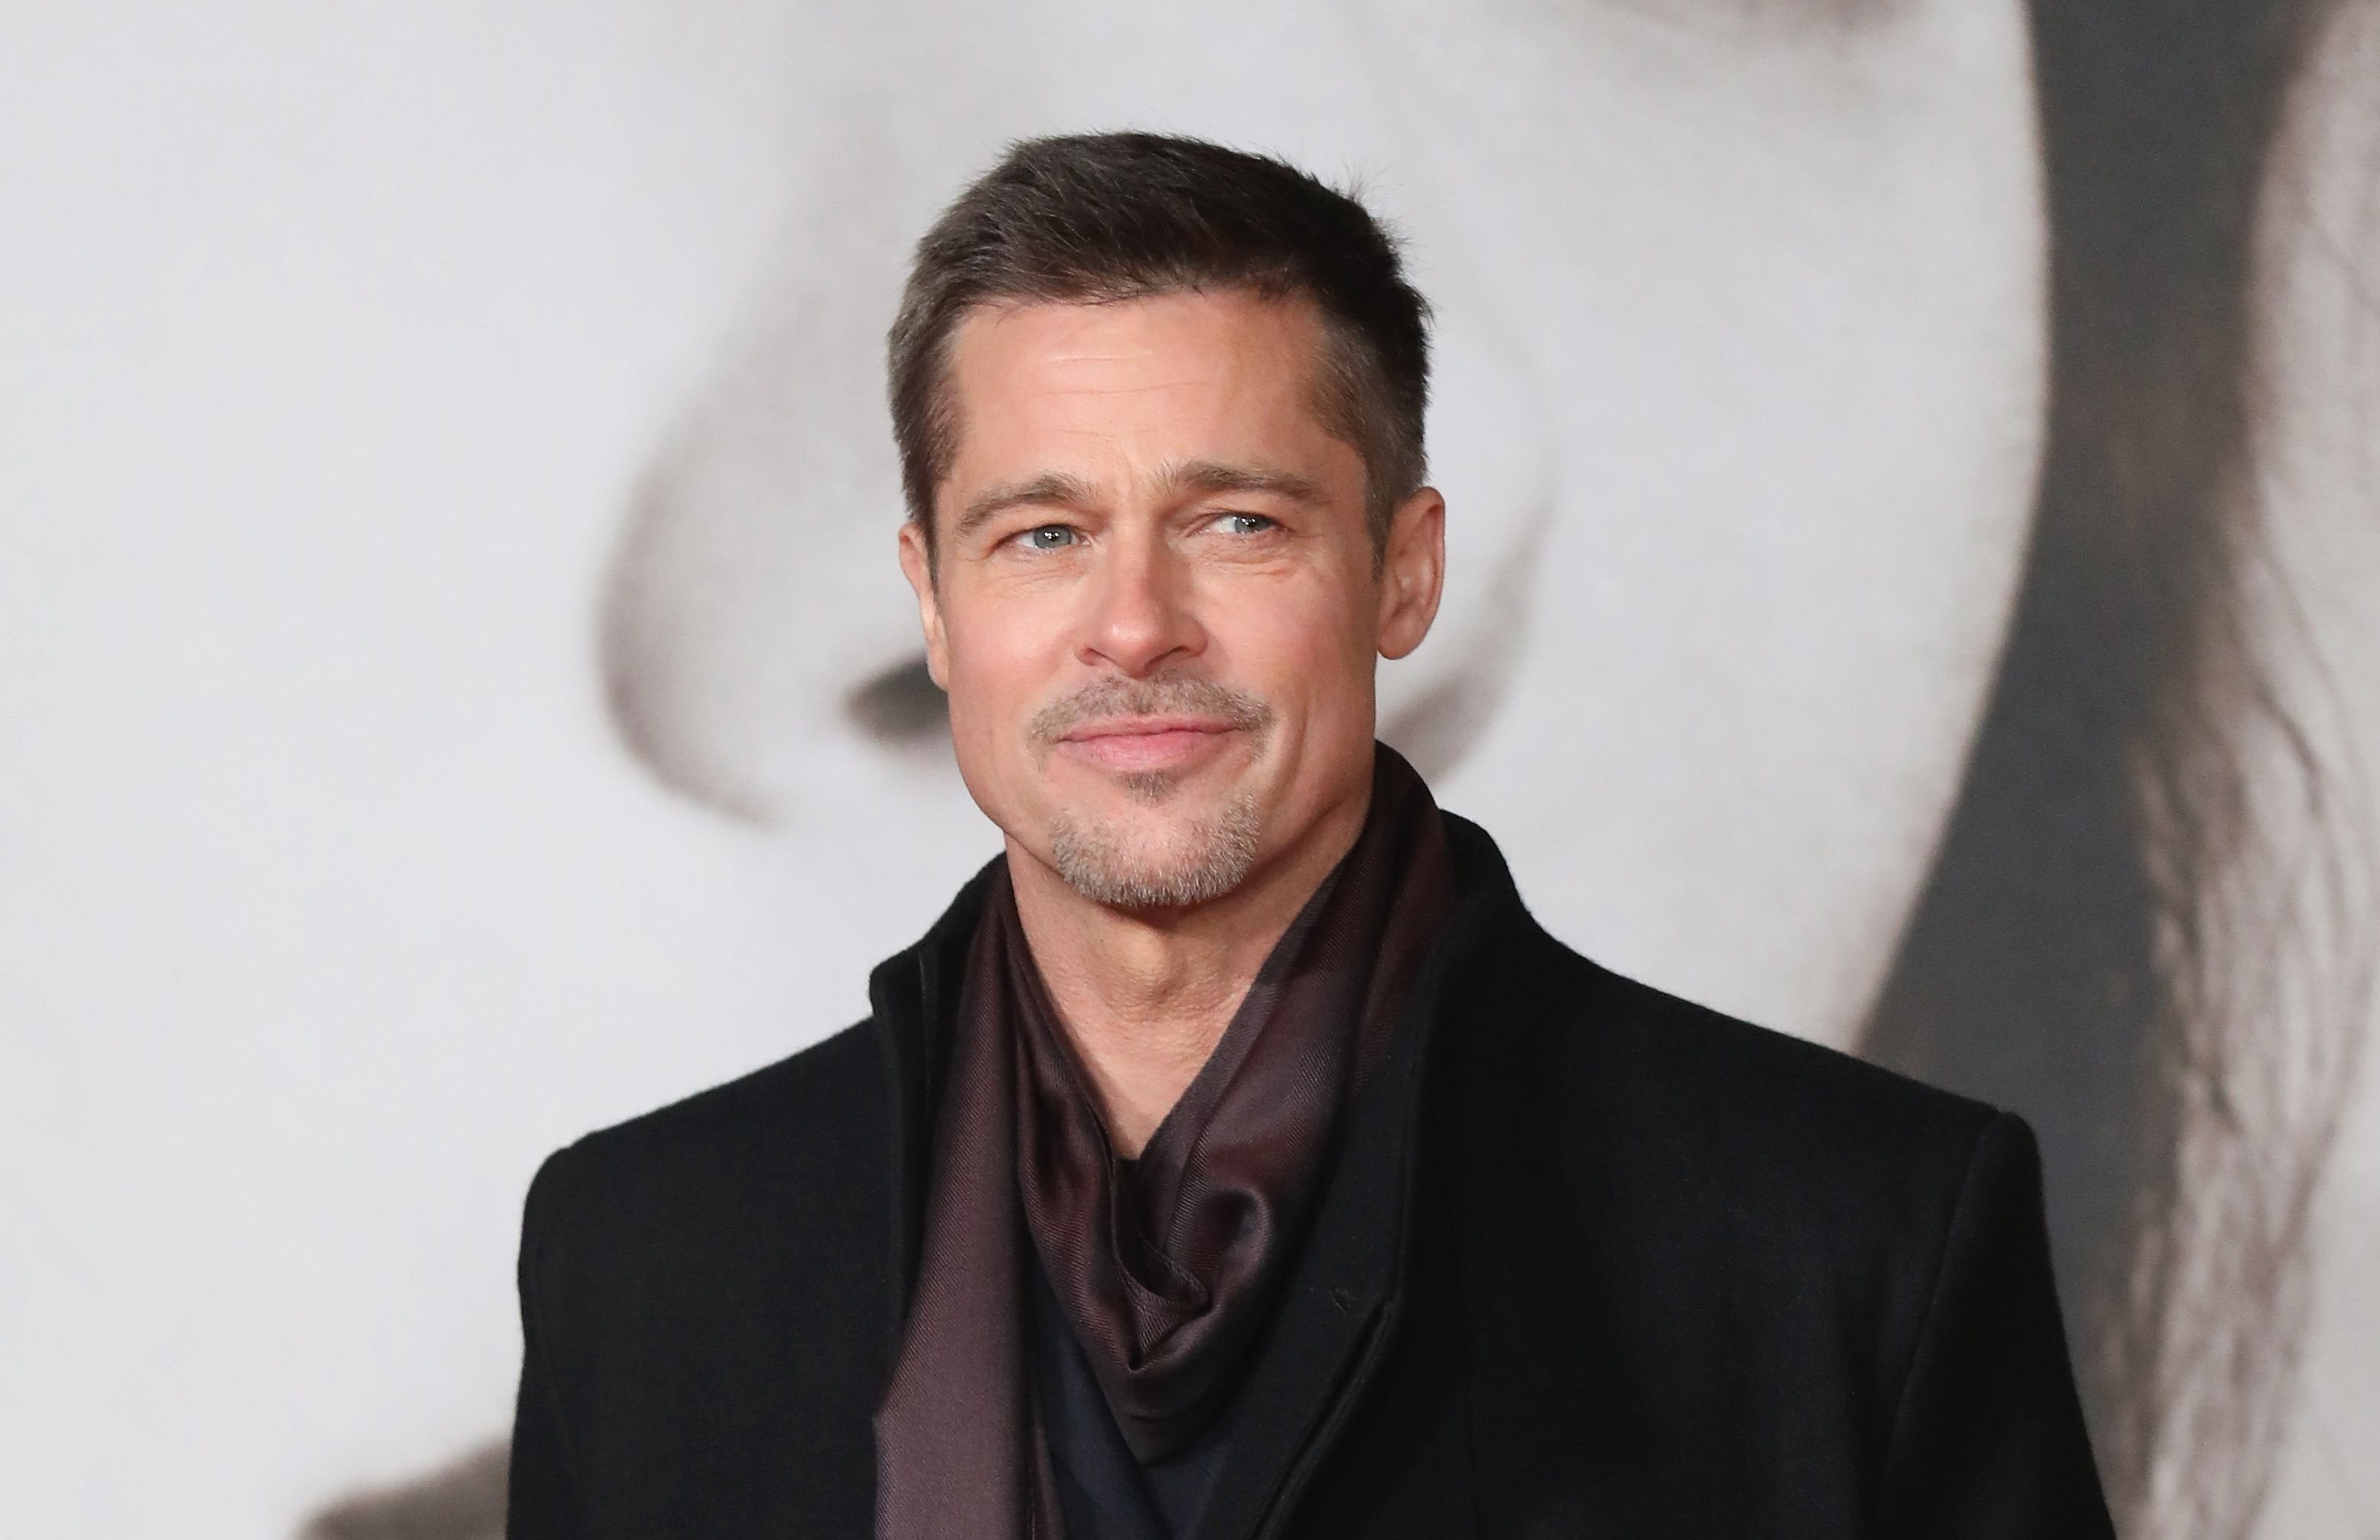 Brad Pitt at the UK Premiere of "Allied" in November 2016 in London, England | Source: Getty Images